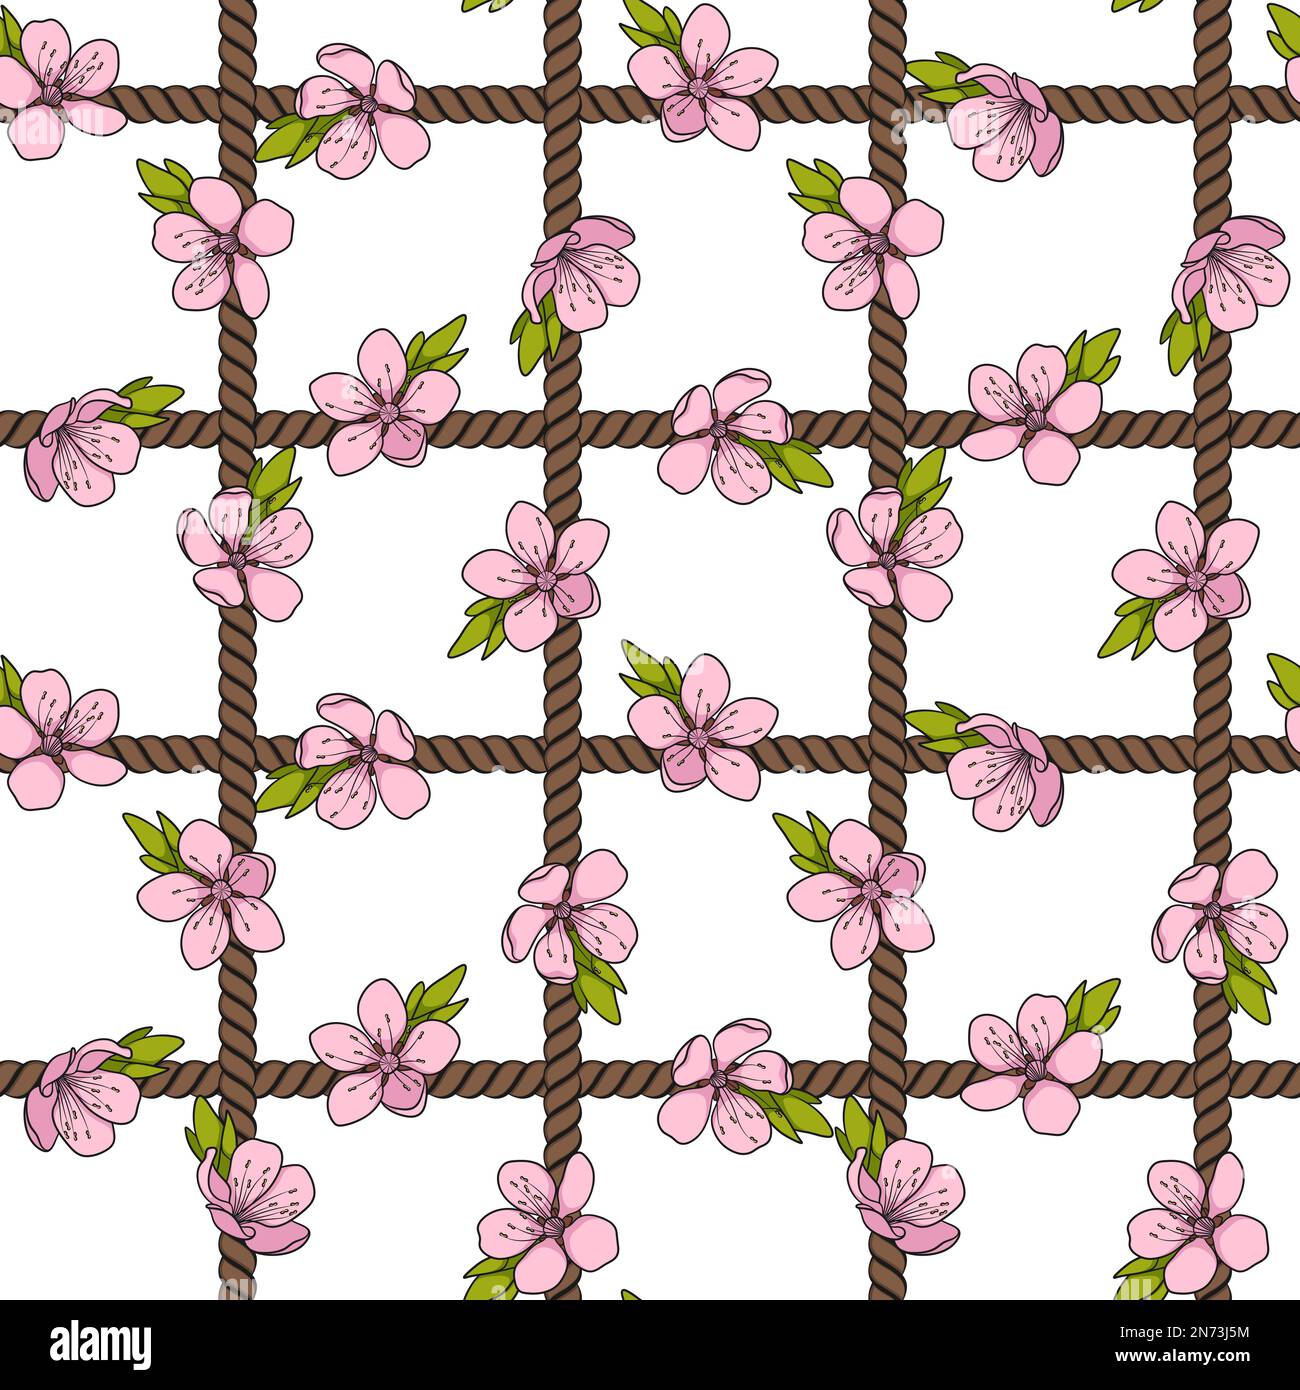 Seamless pattern with net of the cord and pink spring flowers. Colored vector background with objects on white. Stock Vector